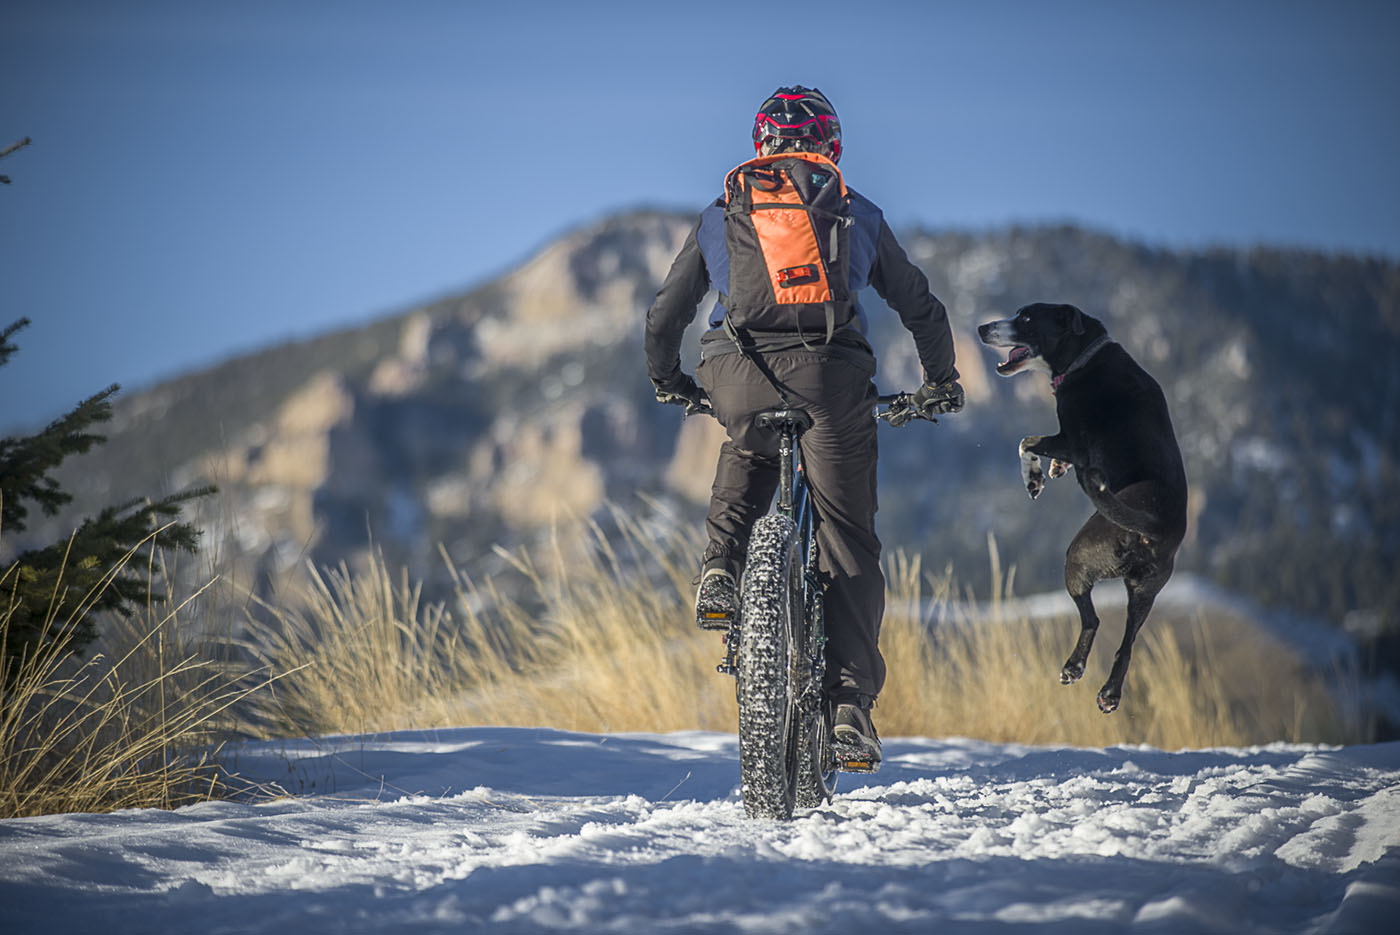 9 out of 10 dogs surveyed prefer fat biking to satisfy their winter recreational needs.